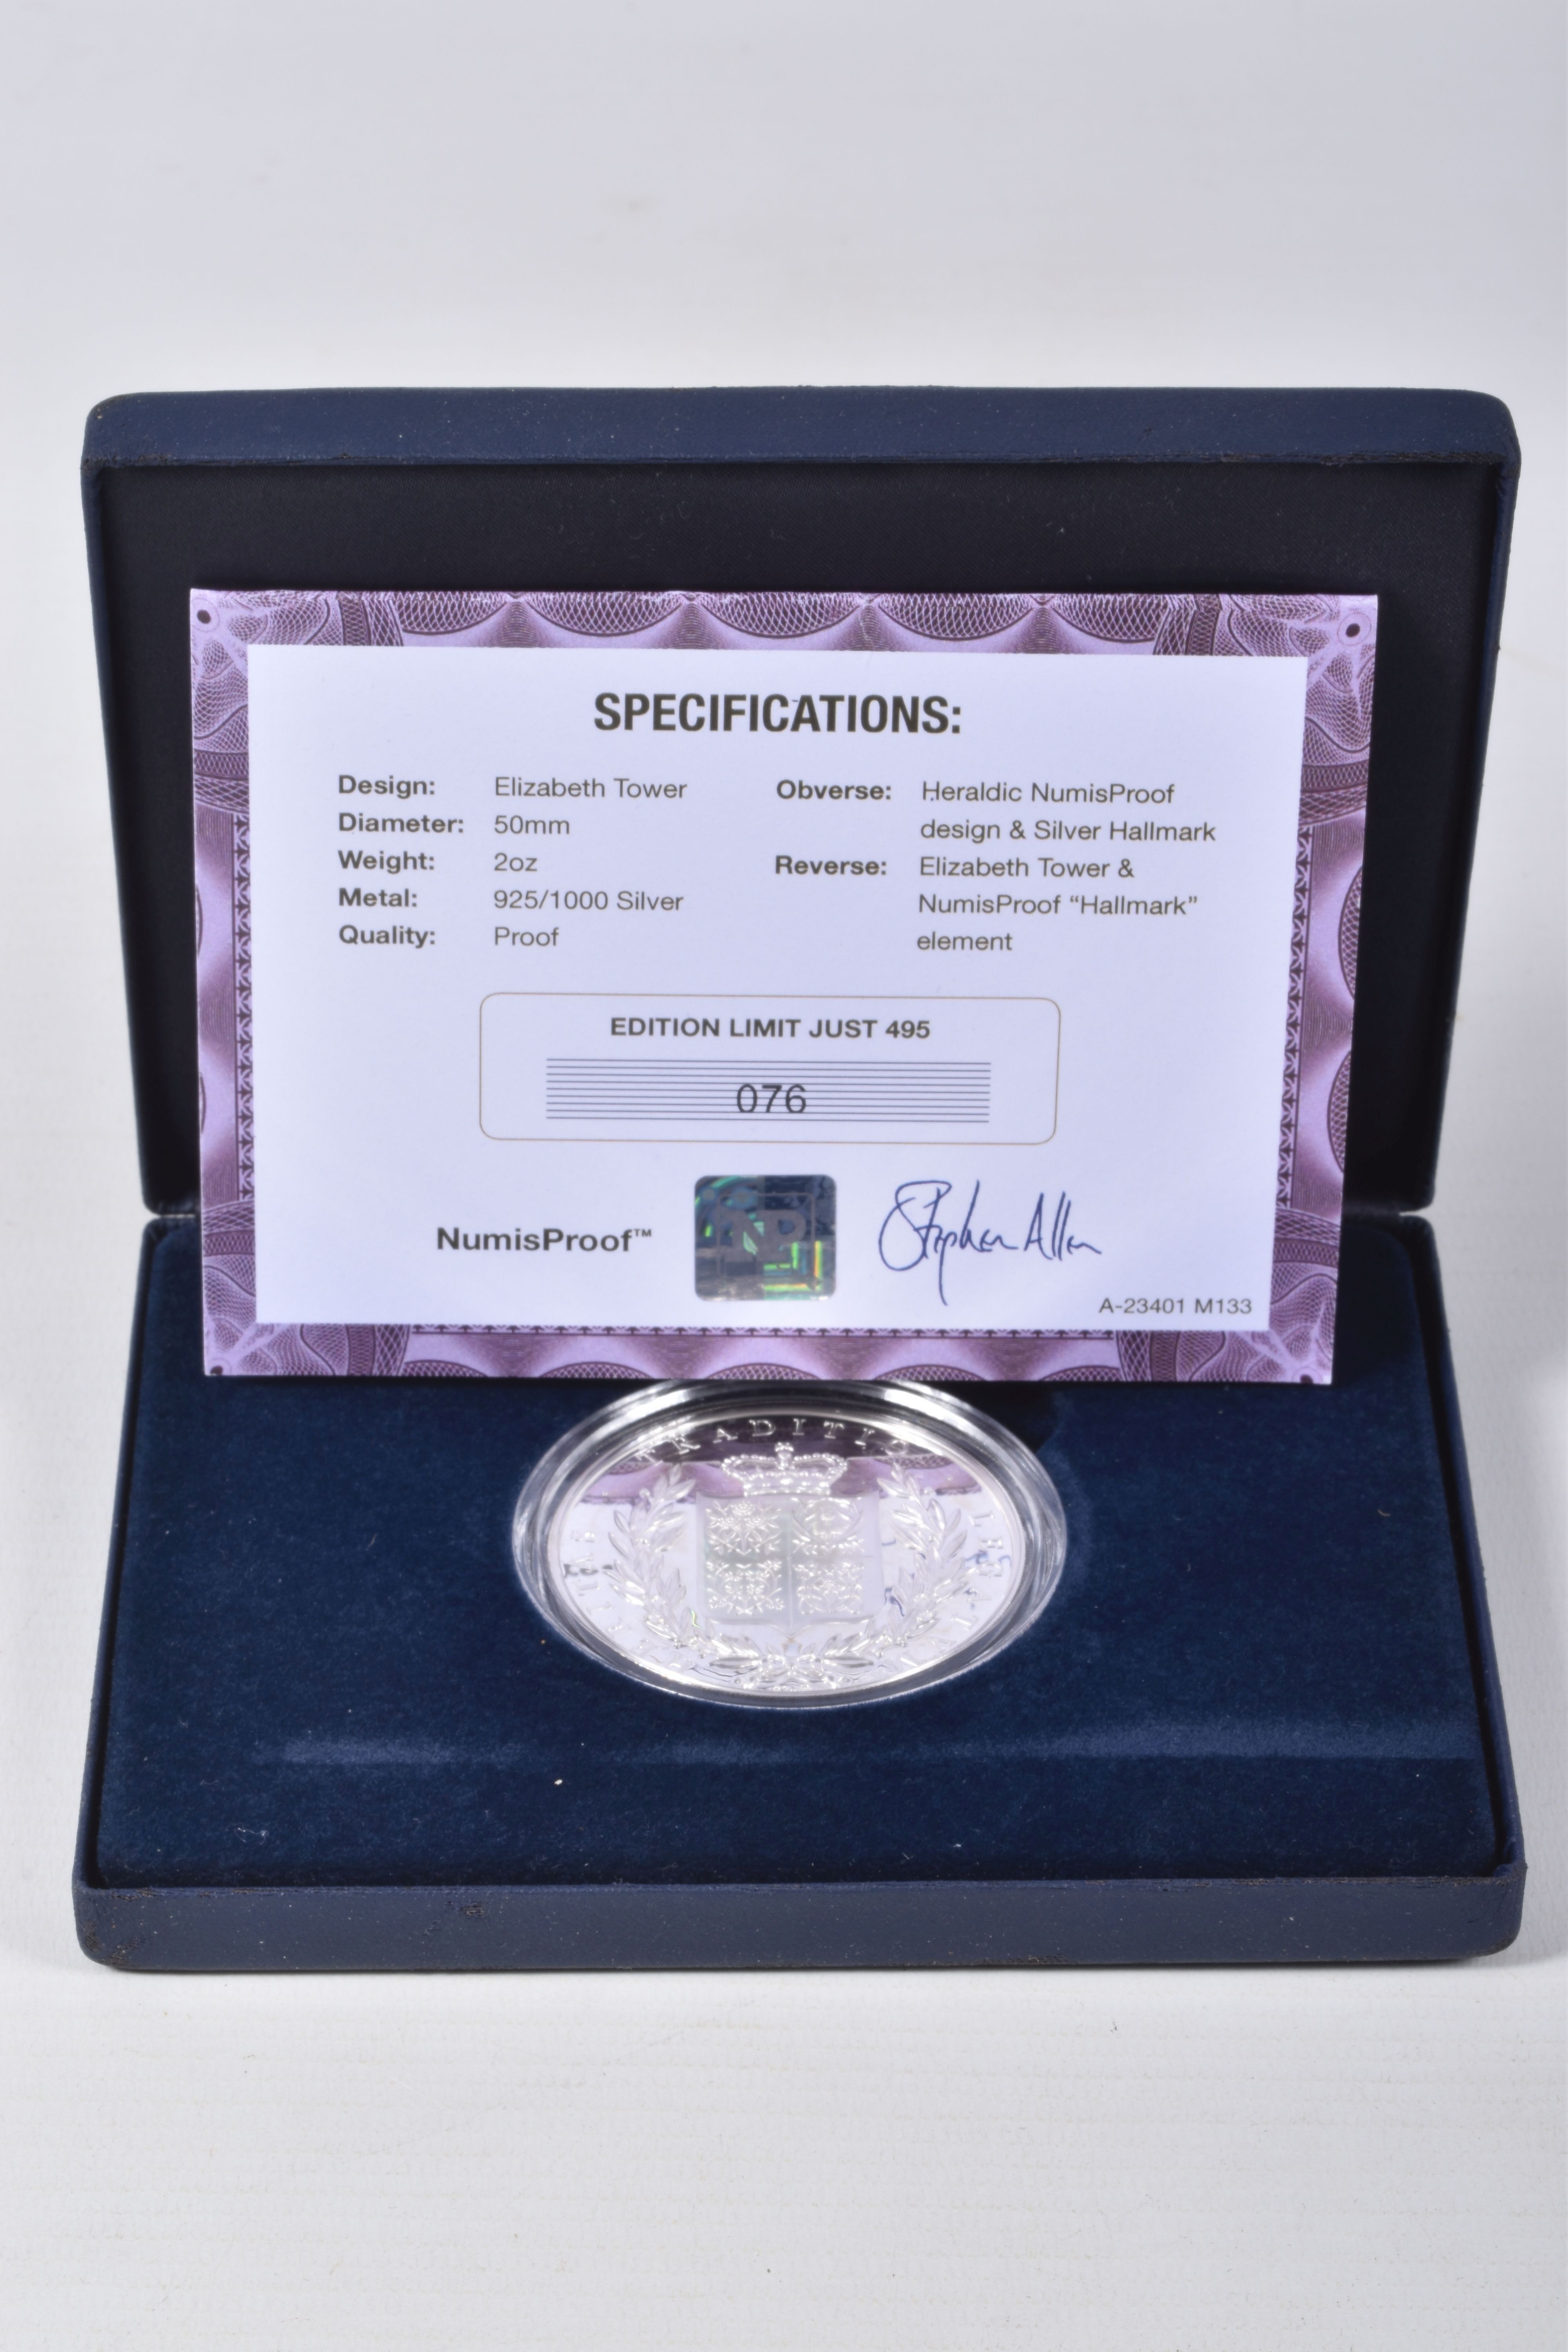 A 2012 SILVER PROOF .925 RENAMED THE ELIZABETH TOWER (Big Ben Clock Tower) 2oz Numisproof box and - Image 6 of 9